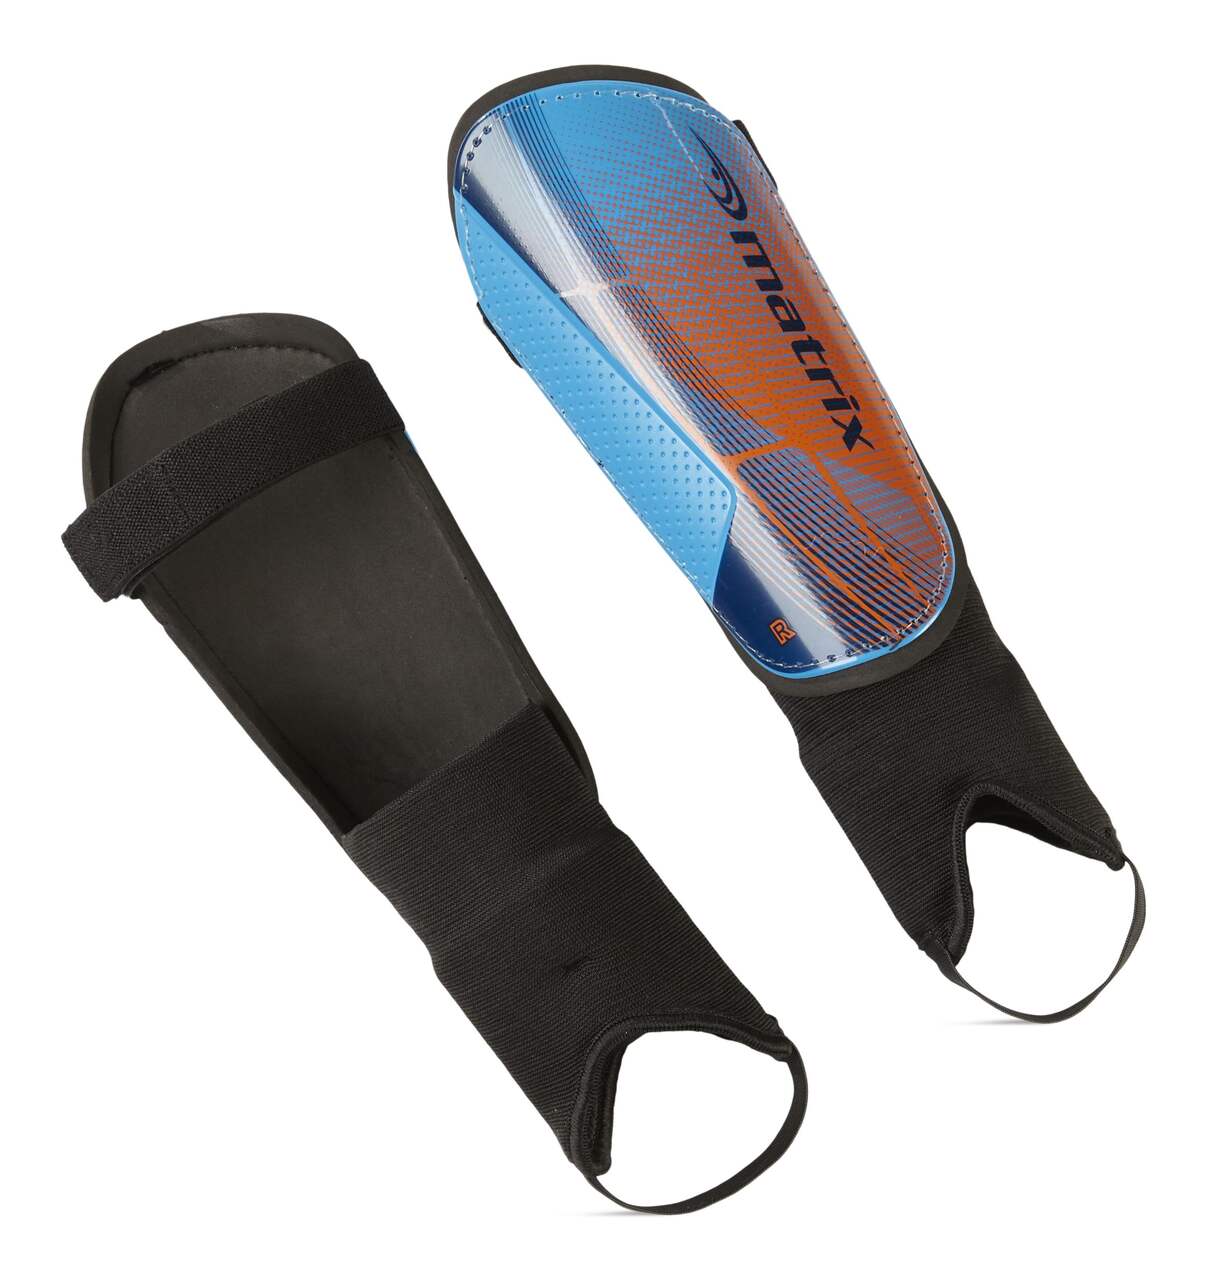 https://media-www.canadiantire.ca/product/playing/team-sports-and-golf/sports-equipment-accessories/1840161/matrix-soccer-shin-guards-blue-orange-senior-d3ef7316-6edc-46a5-887c-405fe37e1430-jpgrendition.jpg?imdensity=1&imwidth=640&impolicy=mZoom